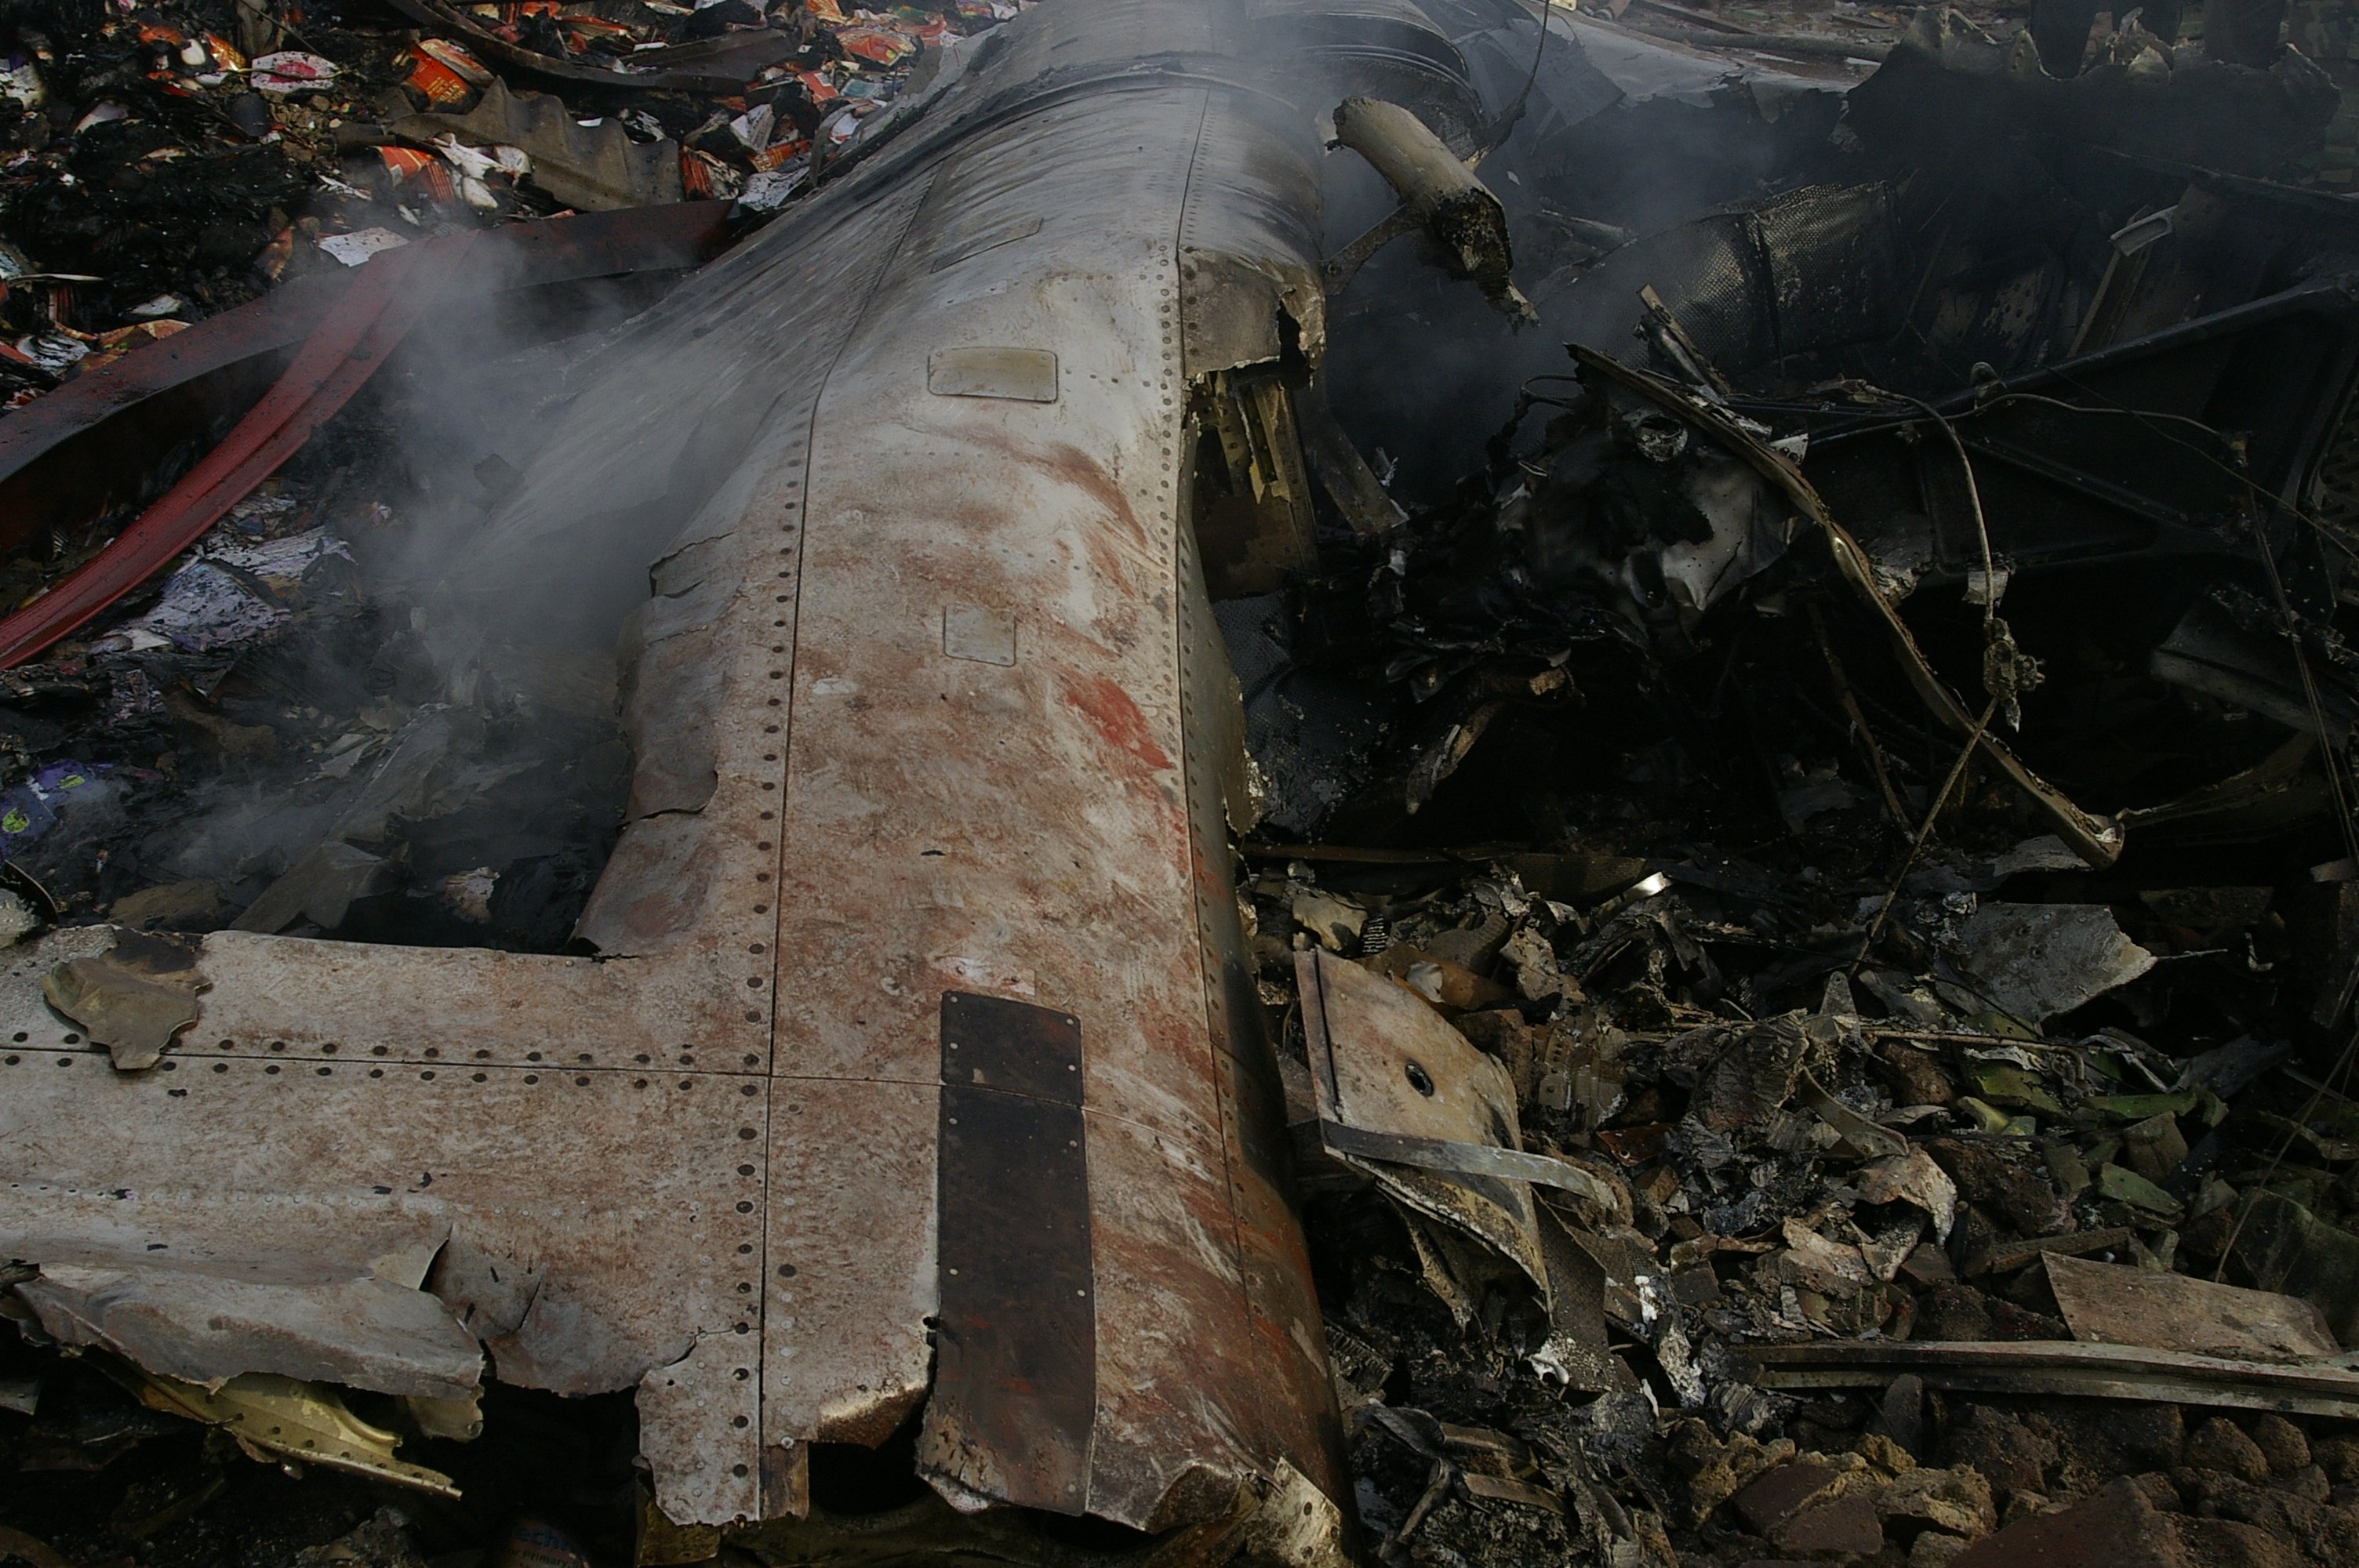 Deadliest commercial airline crashes in history